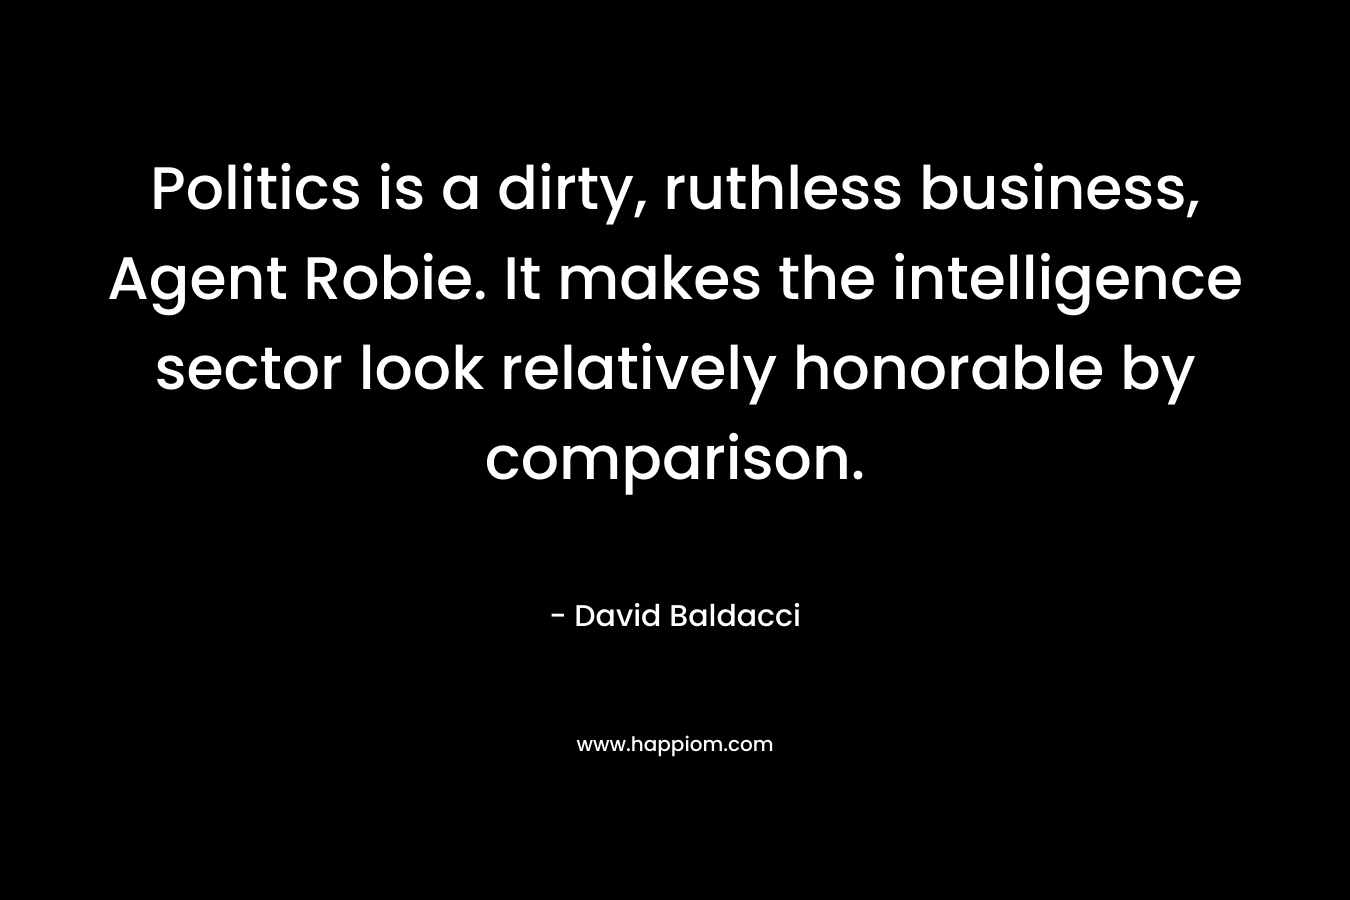 Politics is a dirty, ruthless business, Agent Robie. It makes the intelligence sector look relatively honorable by comparison. – David Baldacci